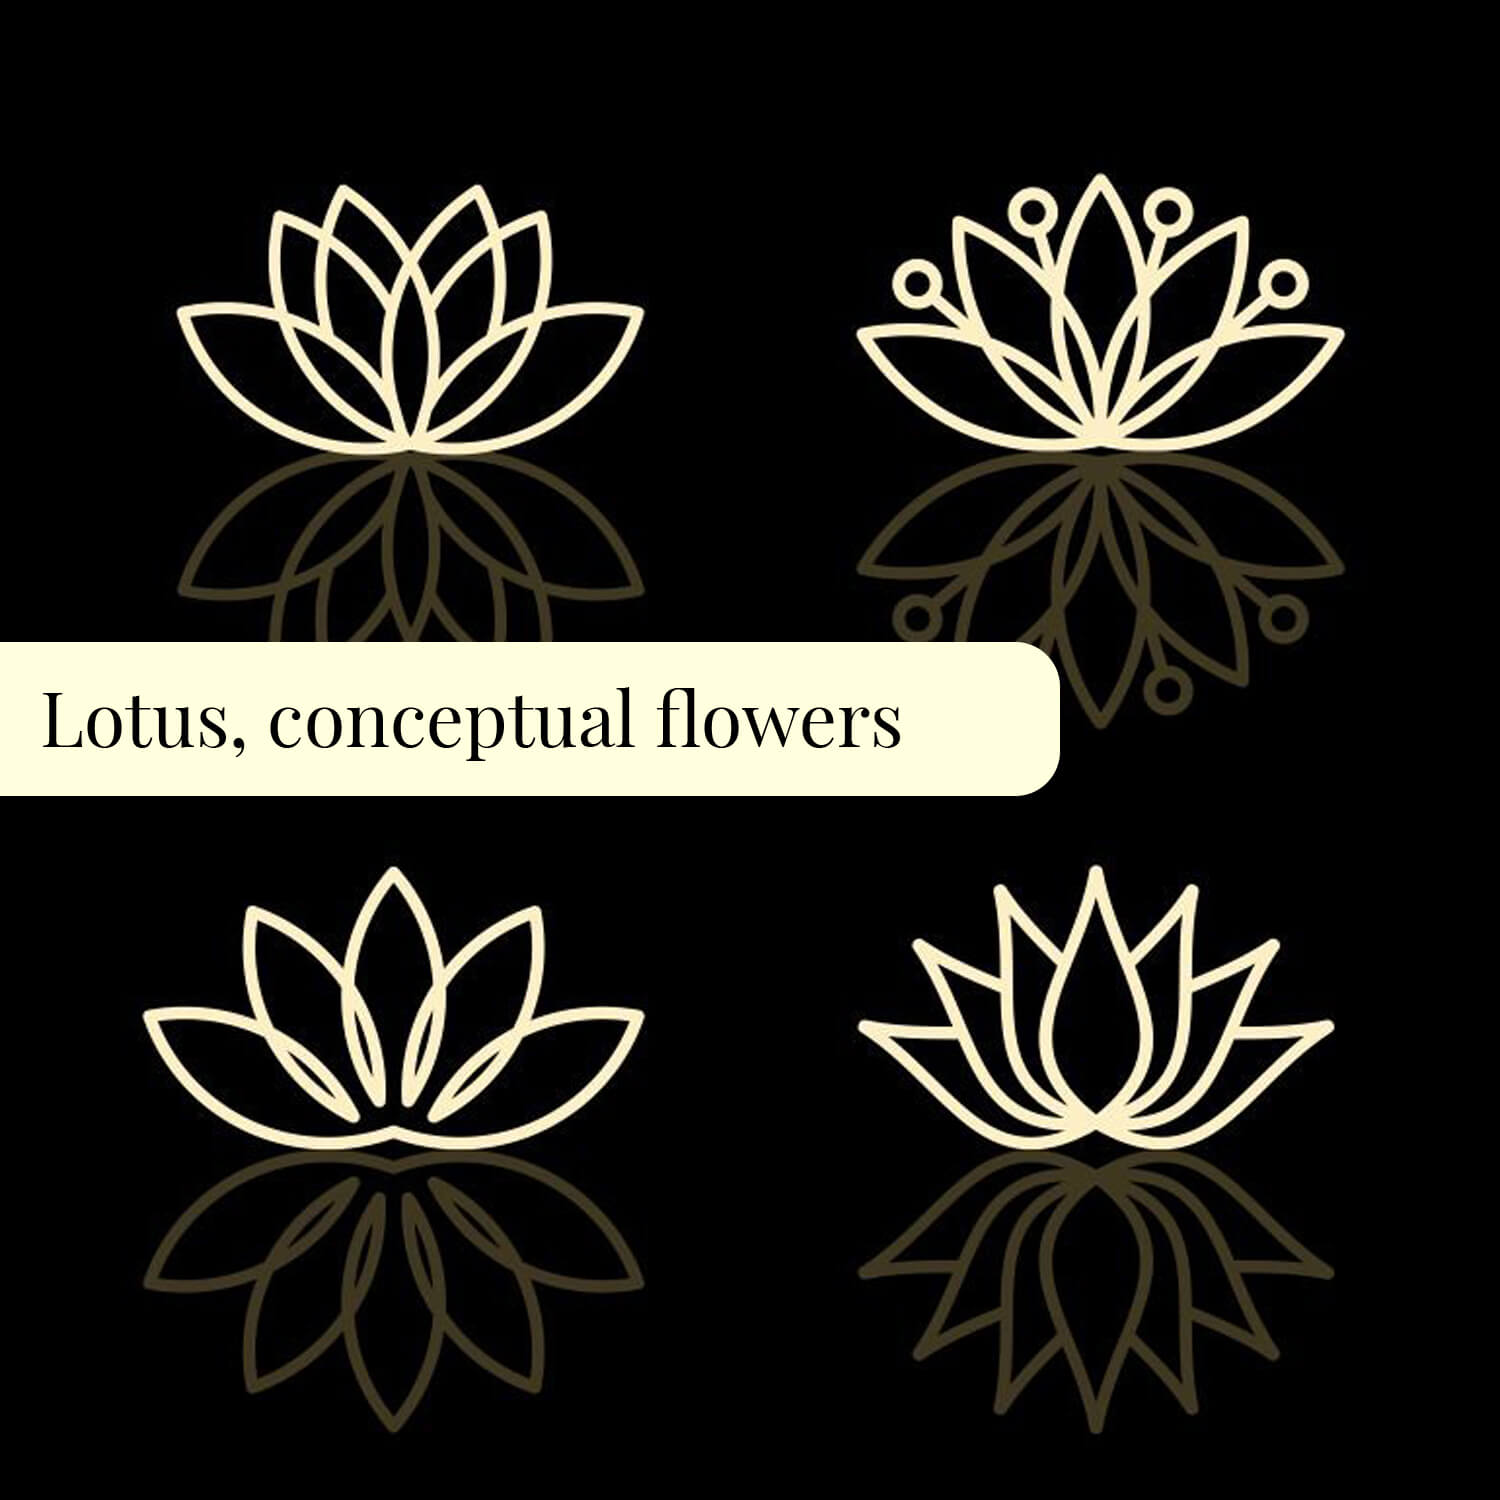 Lotus logo reflected on a glossy black surface.